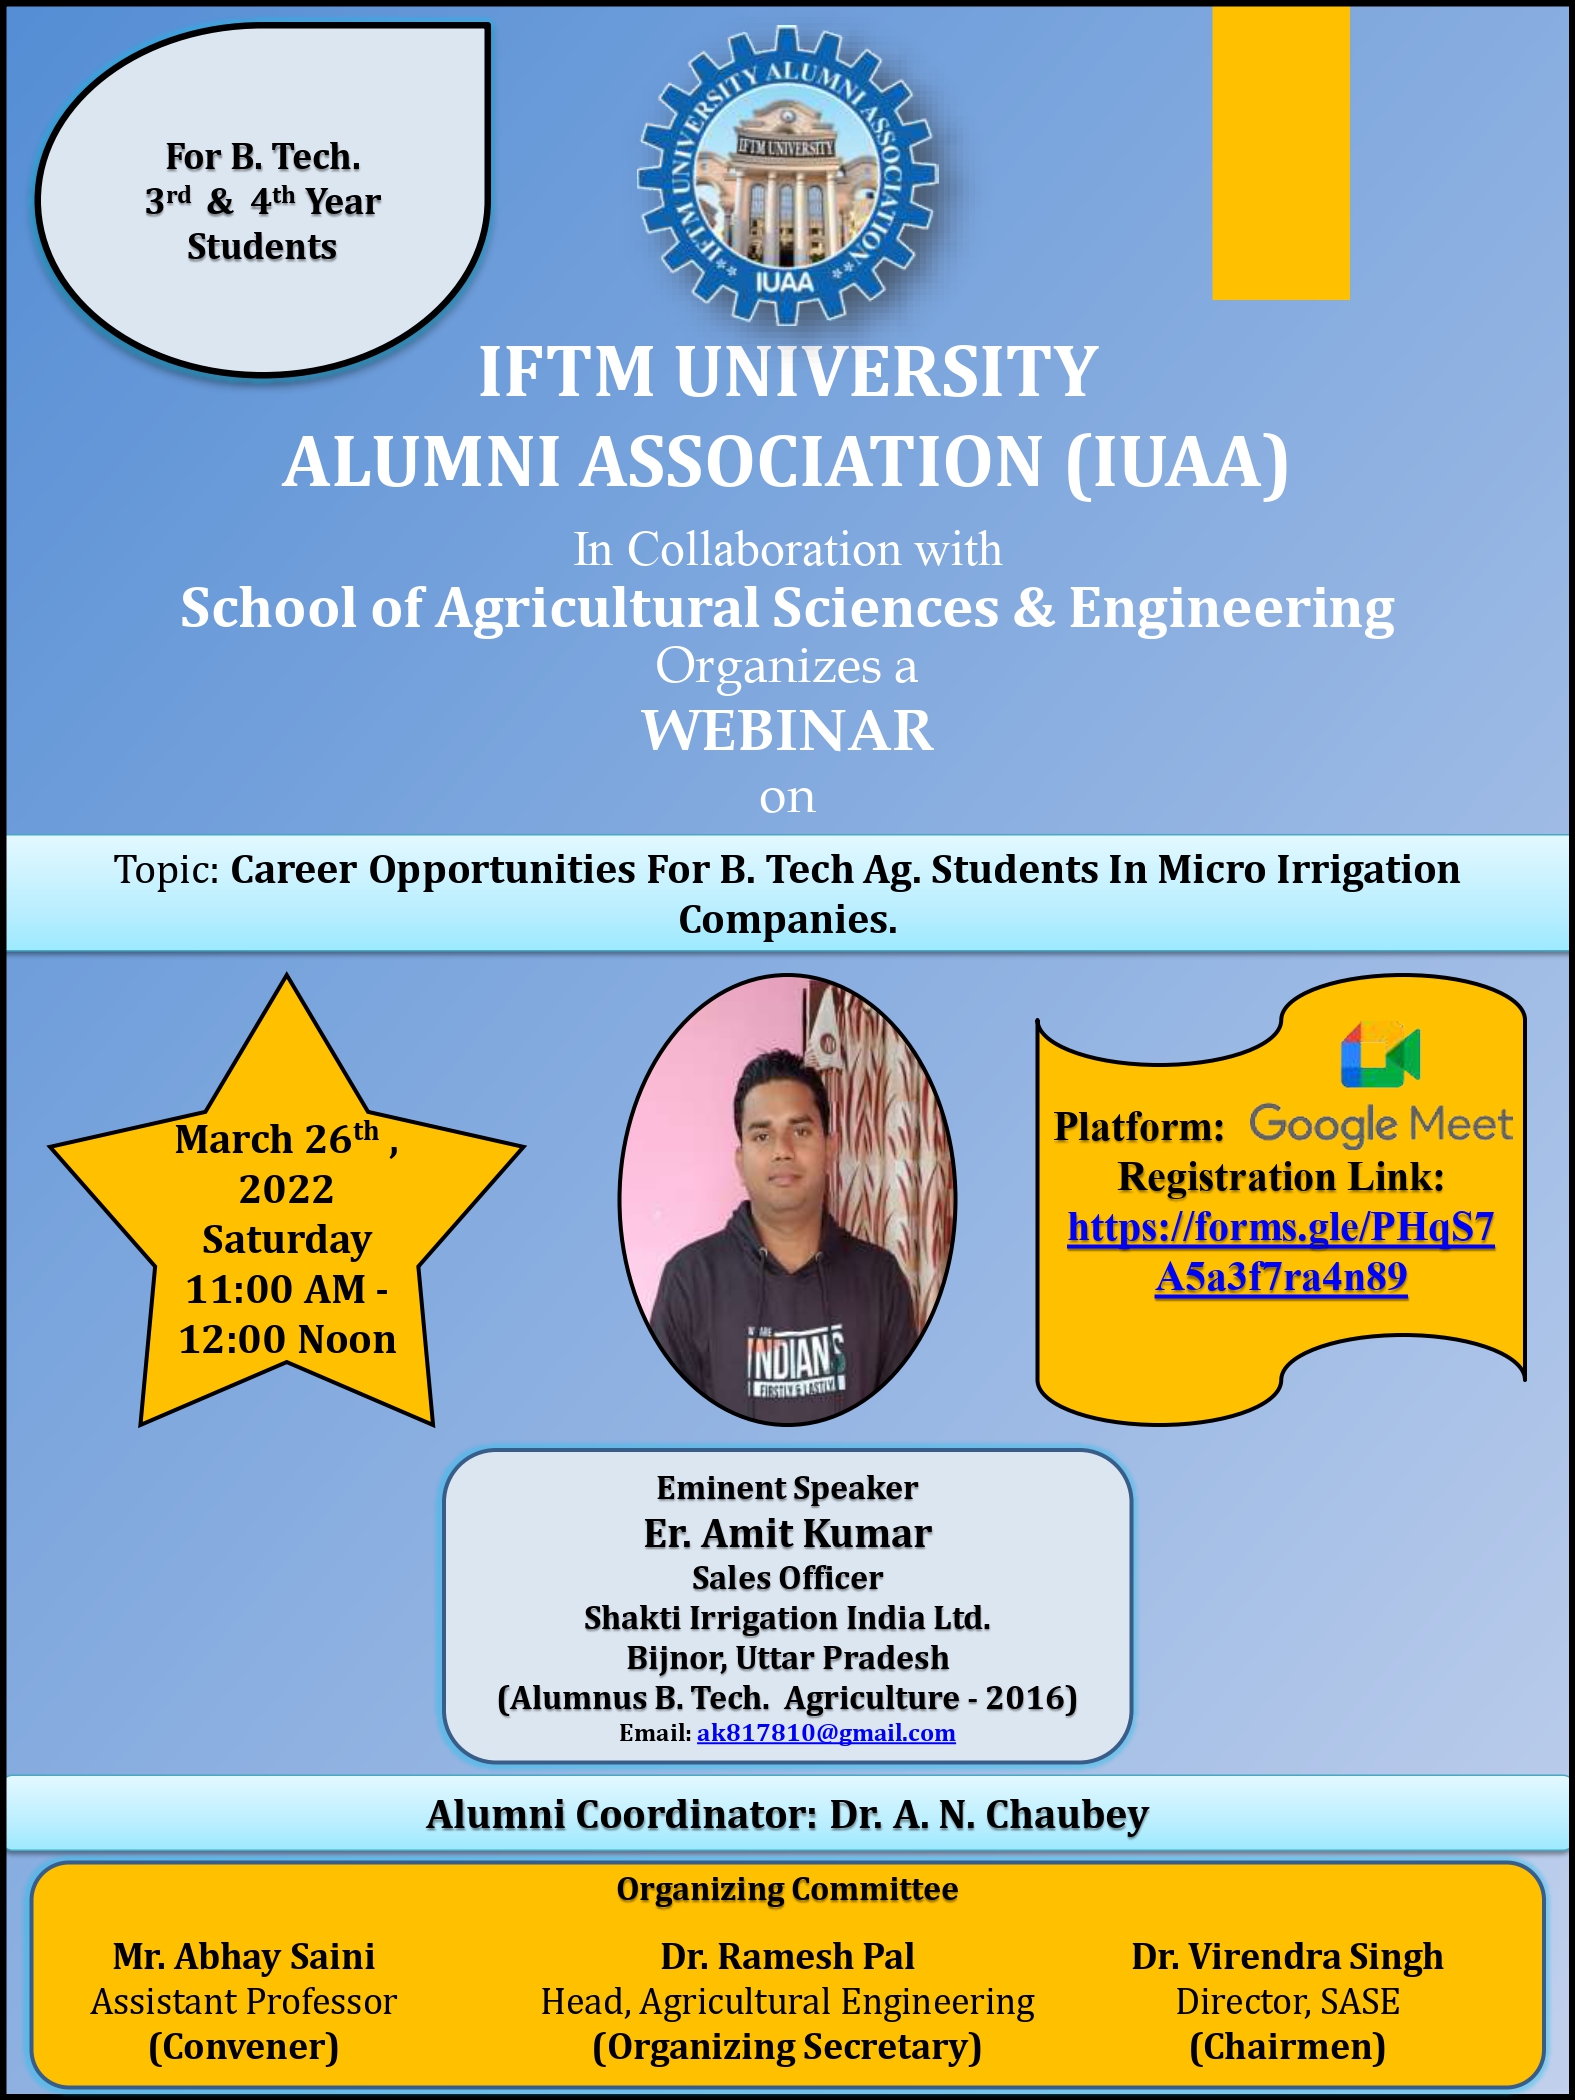 Webinar on Career Opportunities for B.Tech Agricultural Students in Micro Irrigation Companies